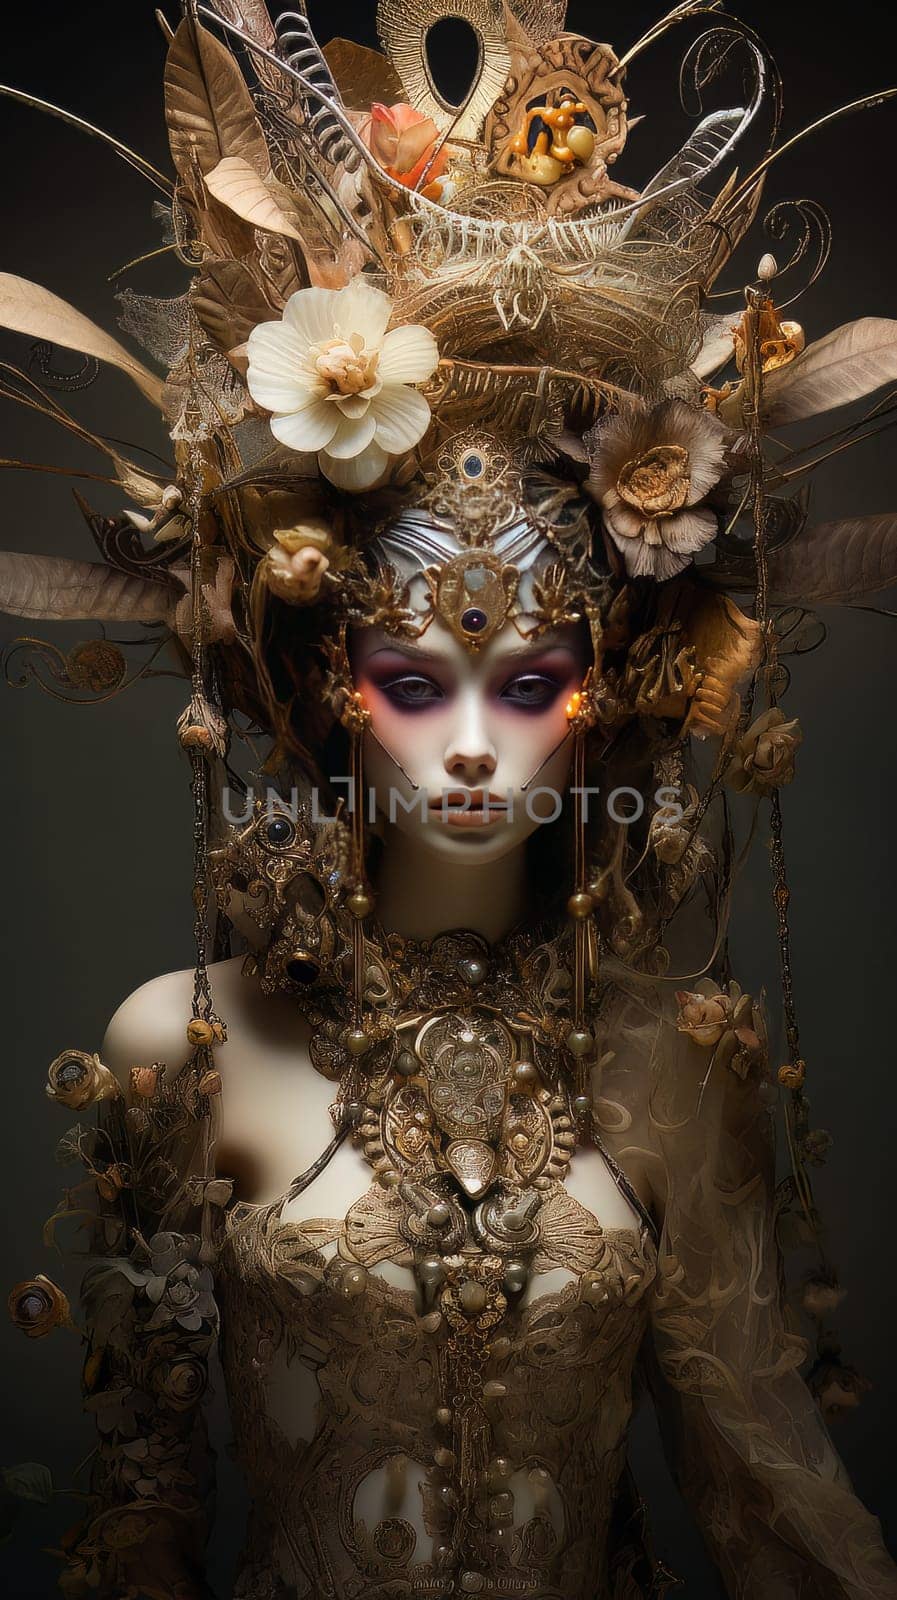 Abstract contemporary portrait of fantasy girl in a gold dress and hat AI by but_photo